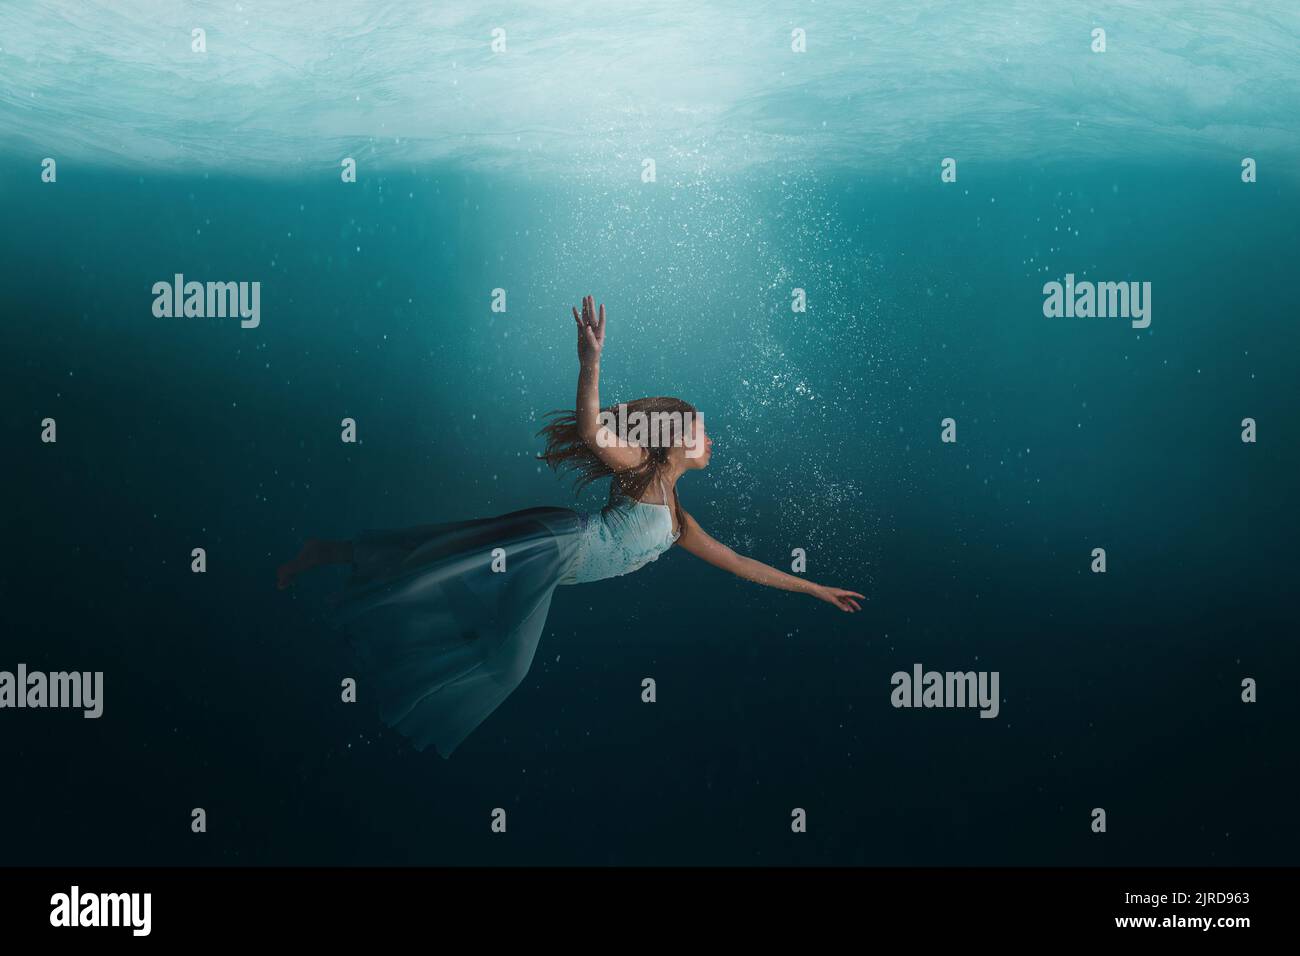 Girl floating in a surreal, dreamlike state under the deep waters of the ocean. Stock Photo